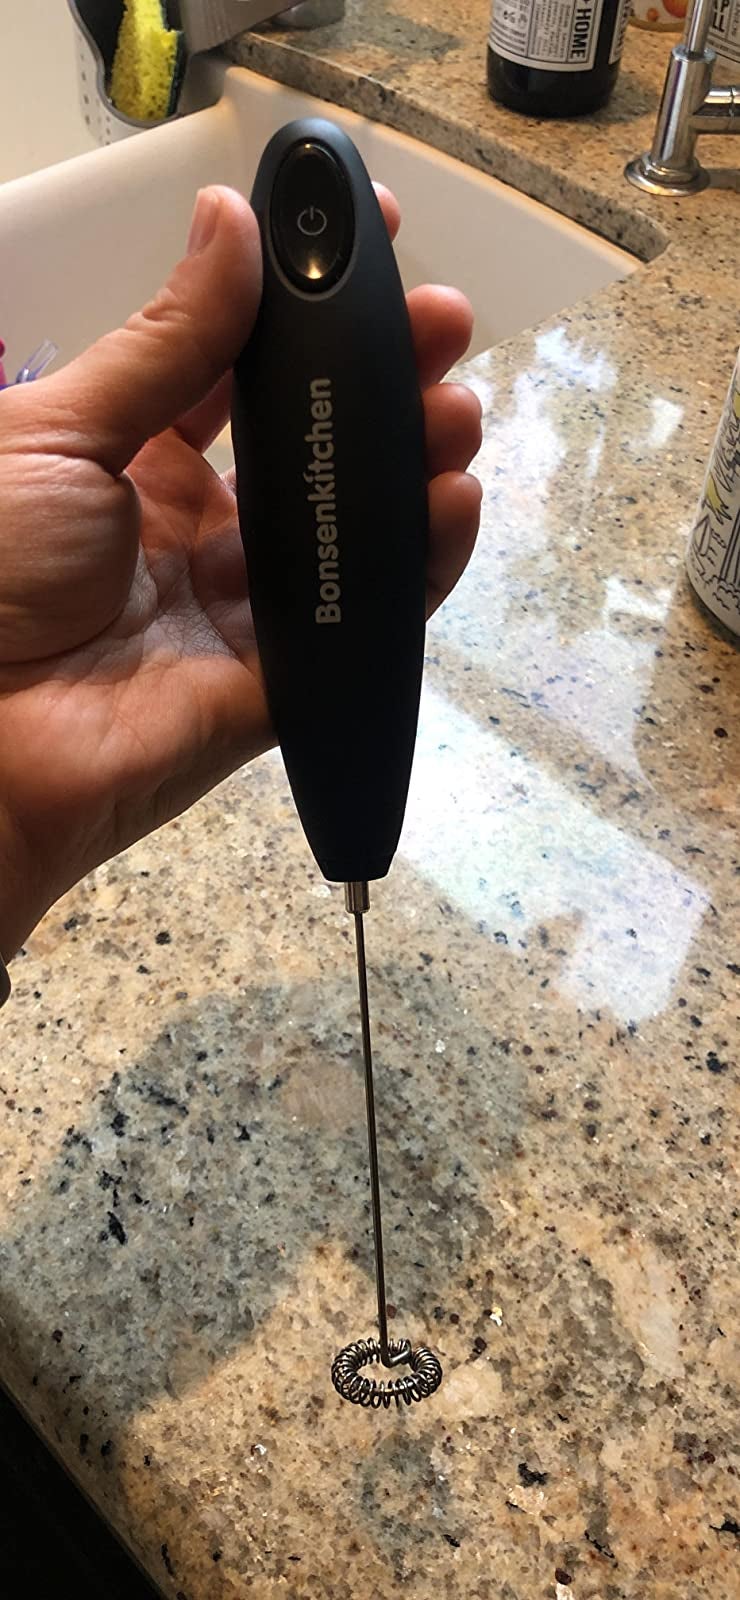 Bonsenkitchen Electric Milk Frother Review 